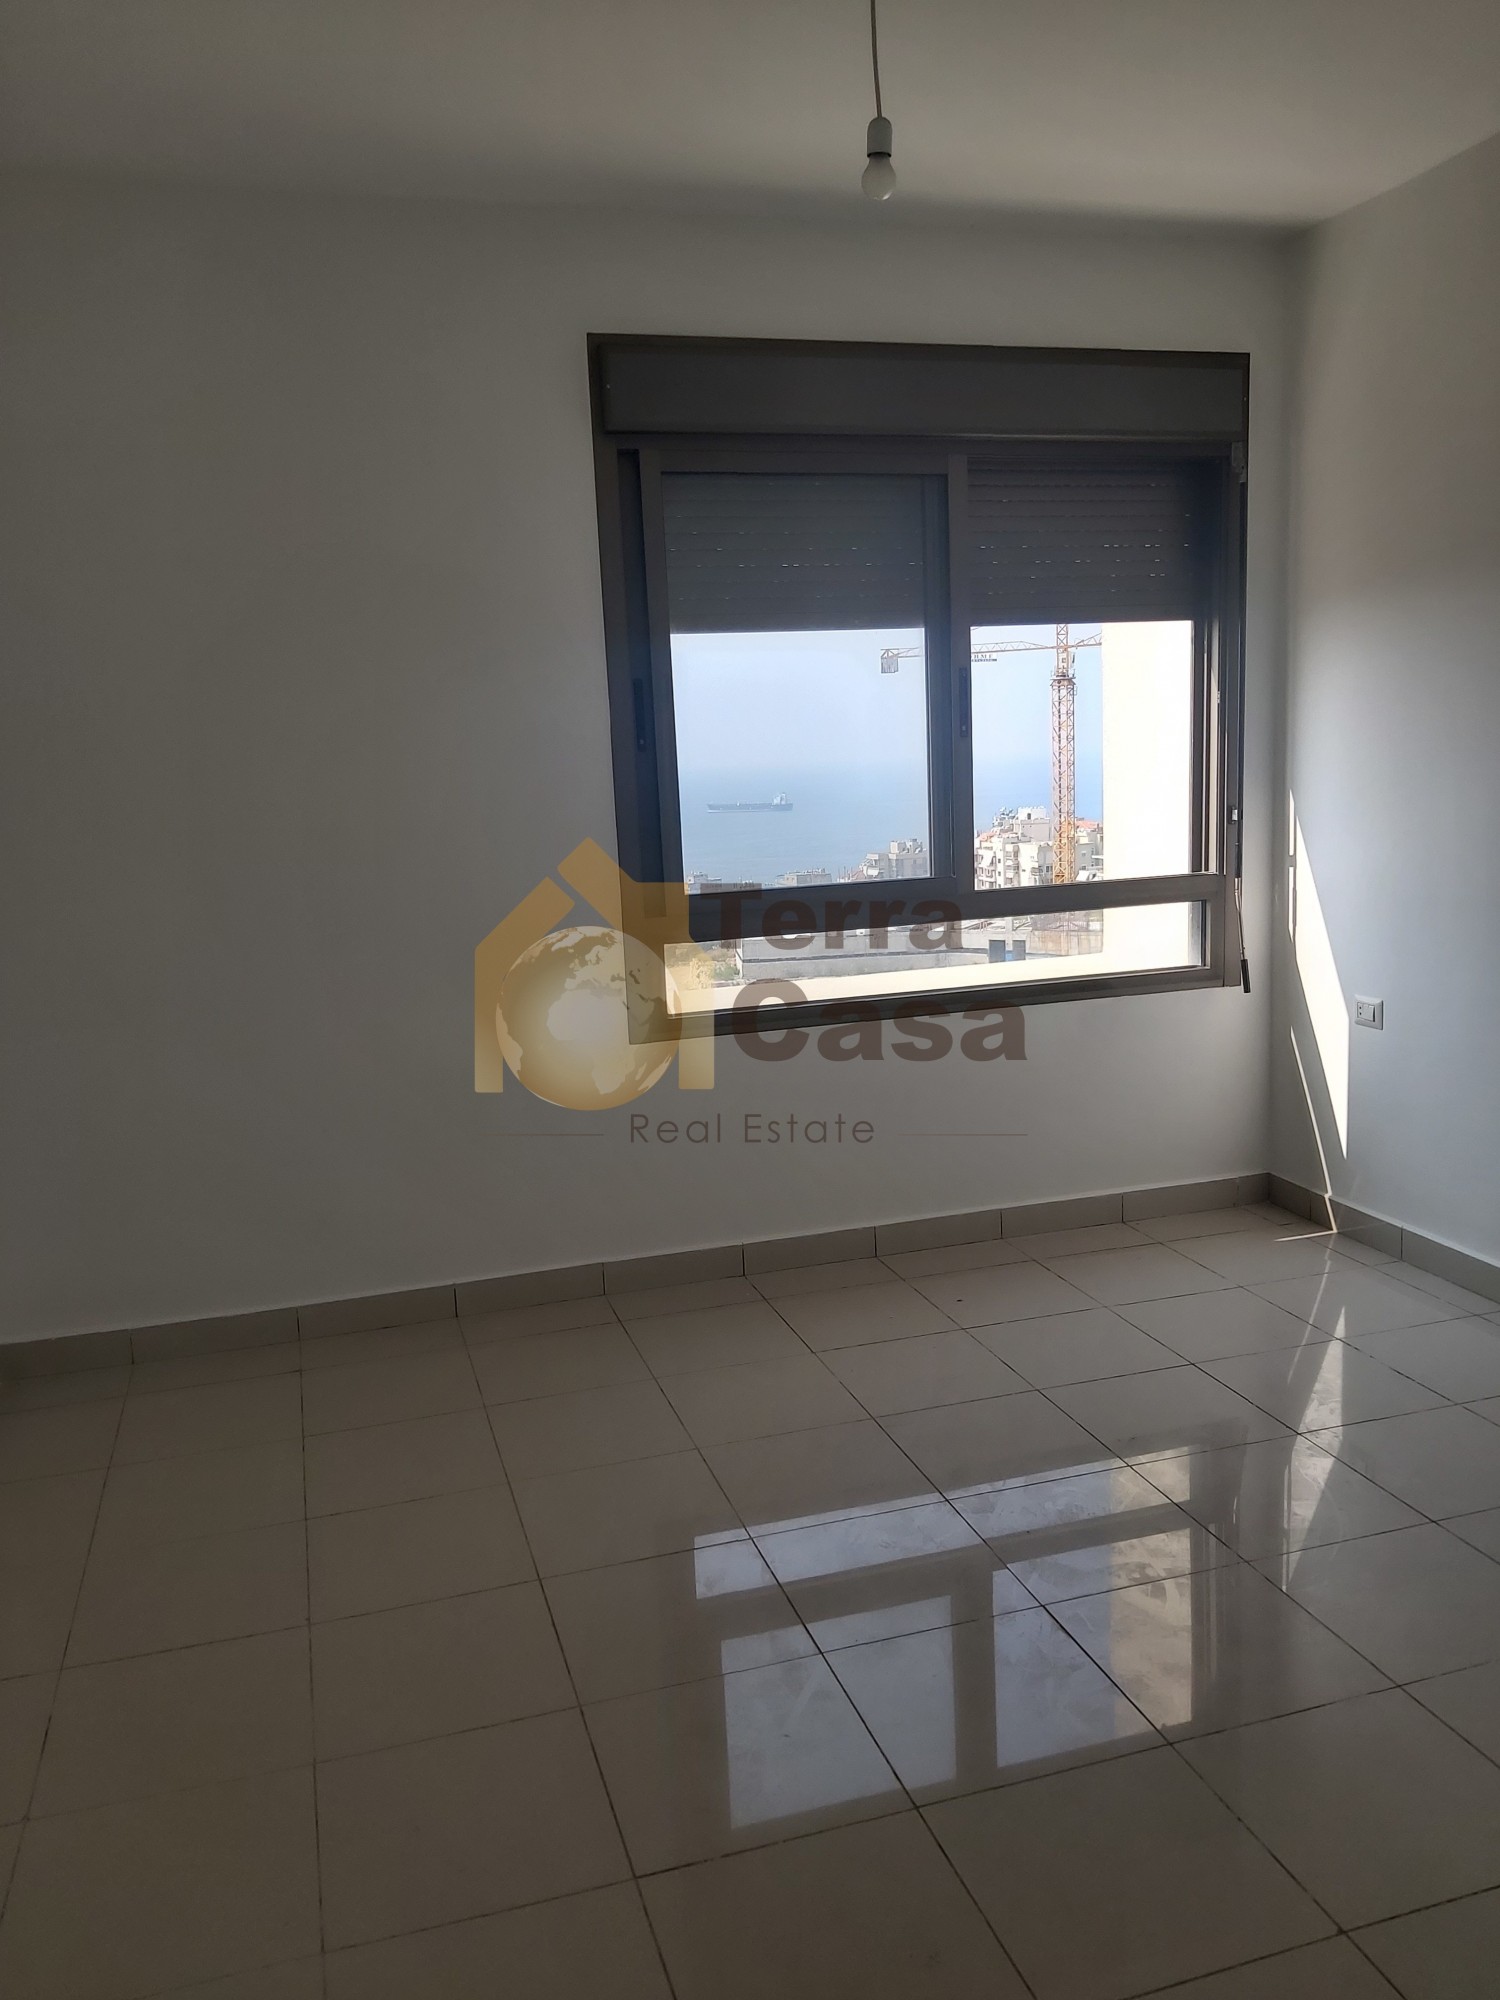 A brand new 185sqm located in Dbayeh overlooking amazing view .